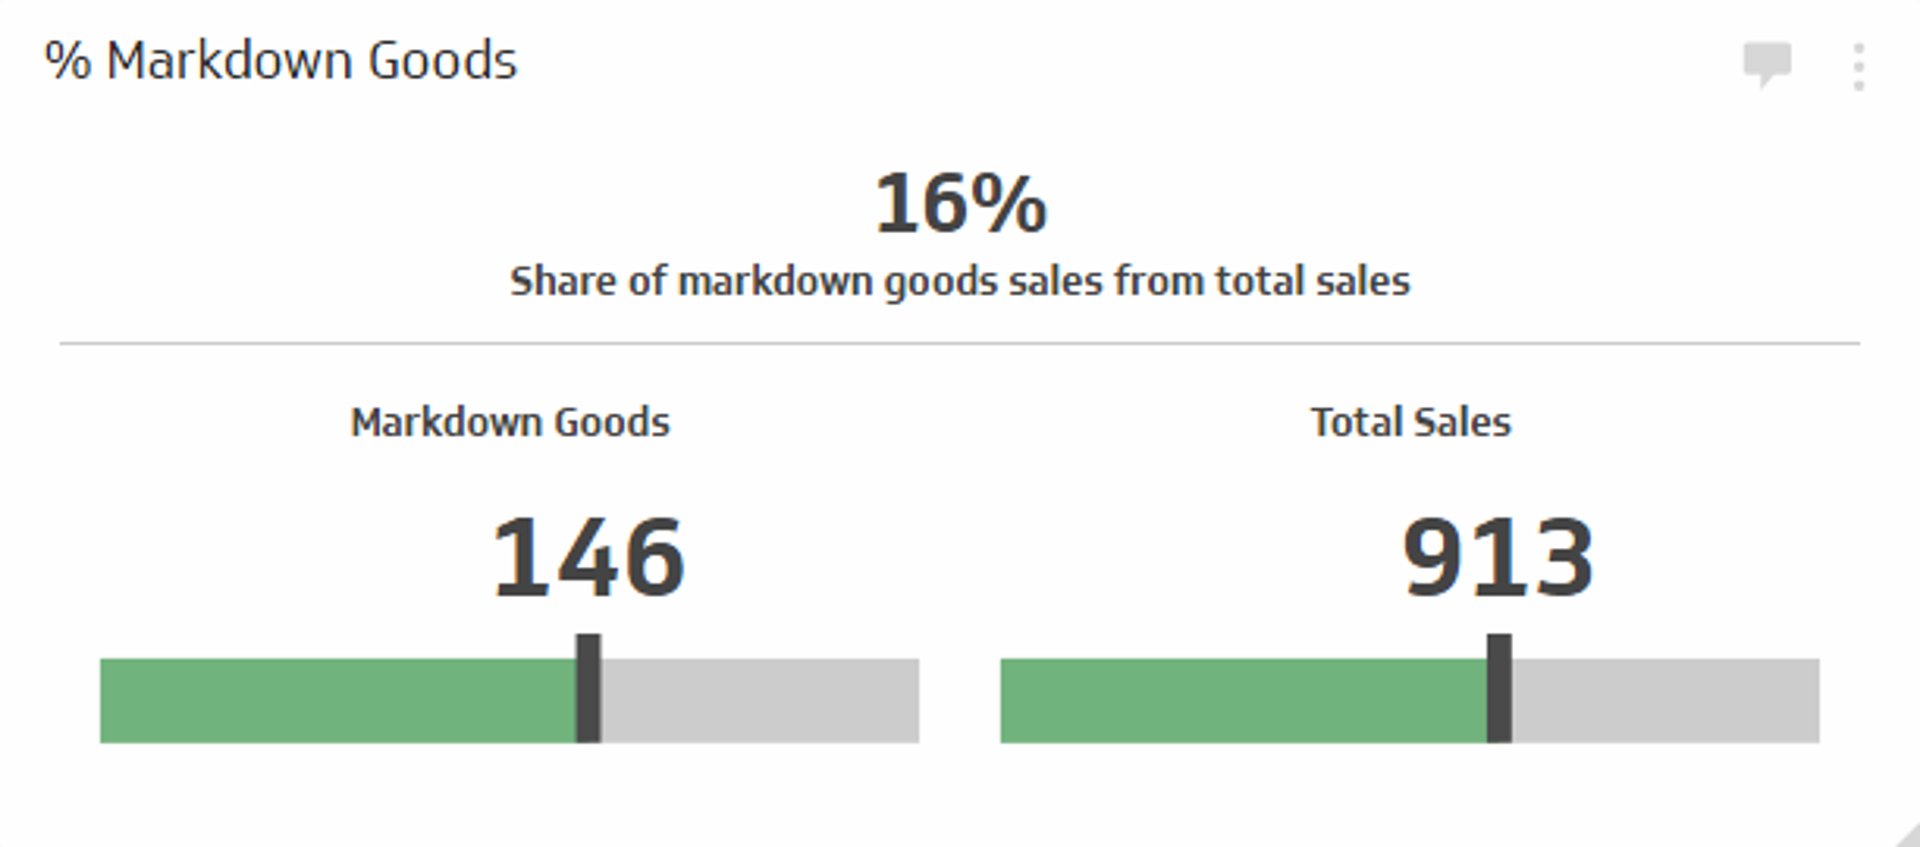 Related KPI Examples -  % Markdown Goods Metric